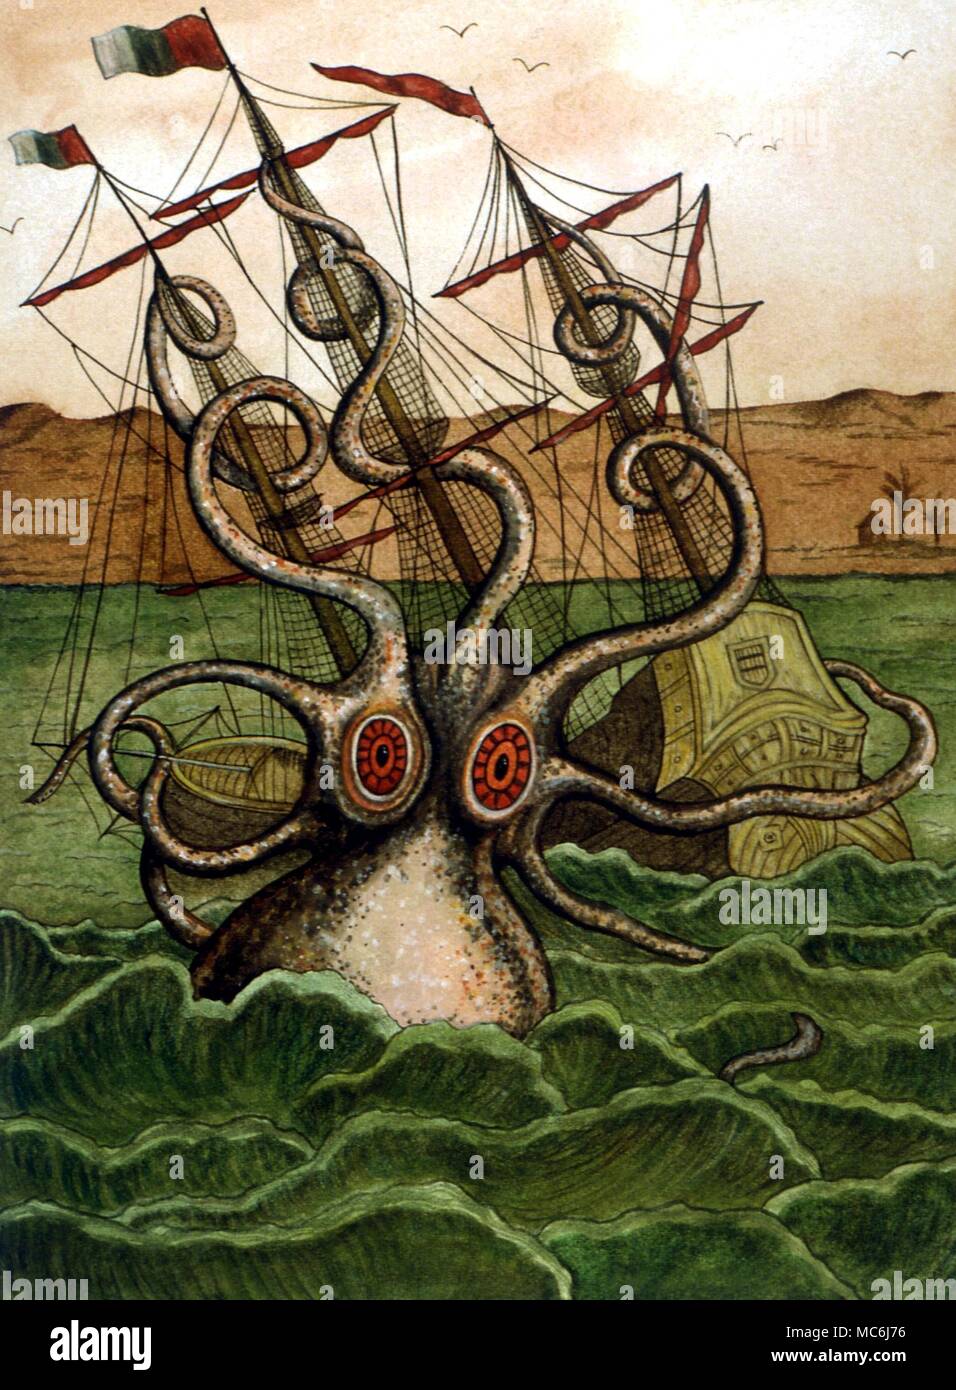 MONSTER - KRAKEN. Sail ship being attacked by a Kraken, in the form of a giant squid - Colossal Octopus by Pierre Denys de Montfort, 1801 Stock Photo